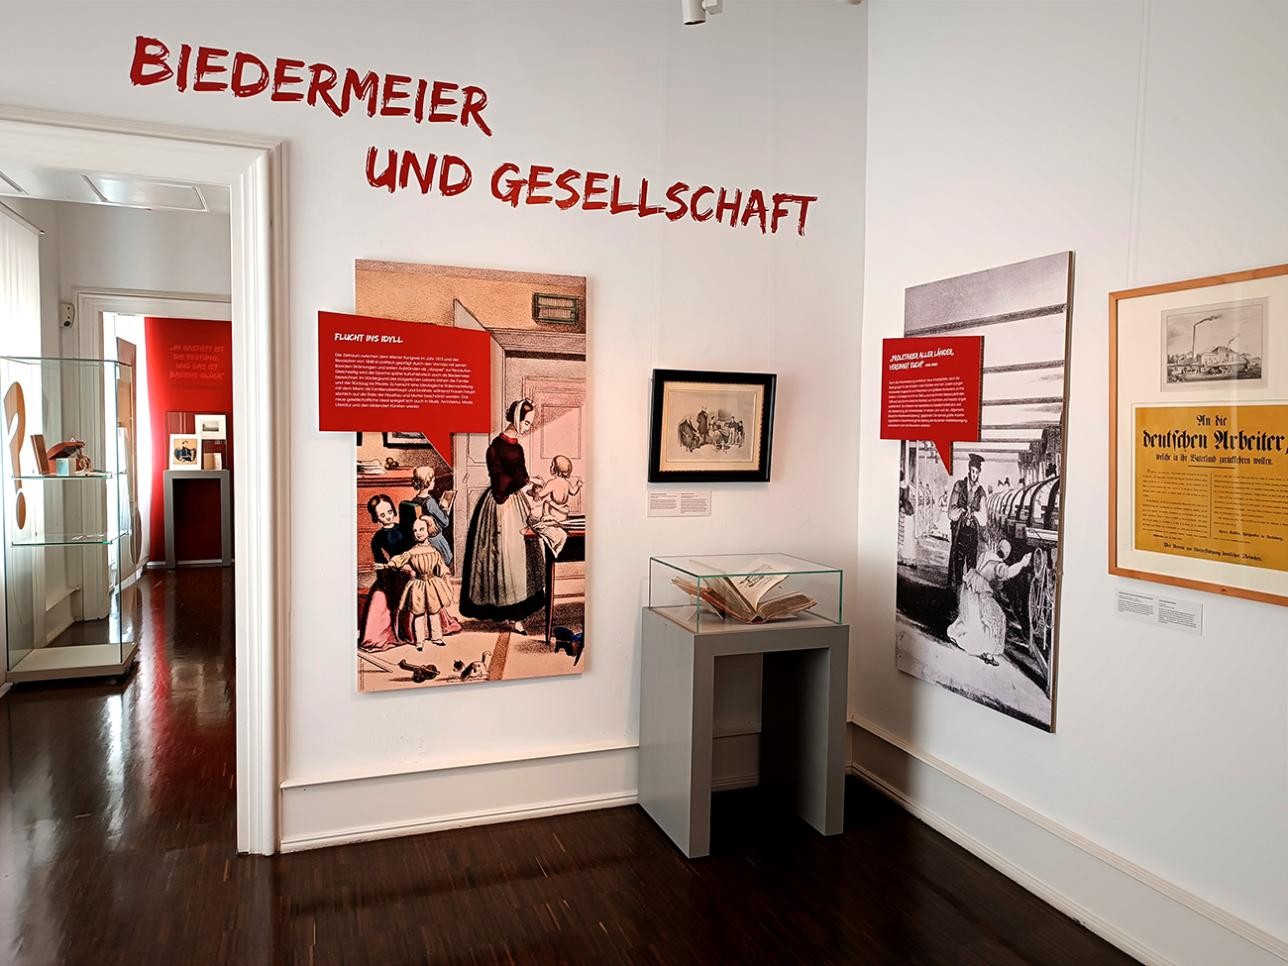 Exhibition room with photos and information on the special exhibition: "For Freedom! Rastatt and the 1848/49 Revolution" at the Rastatt City Museum